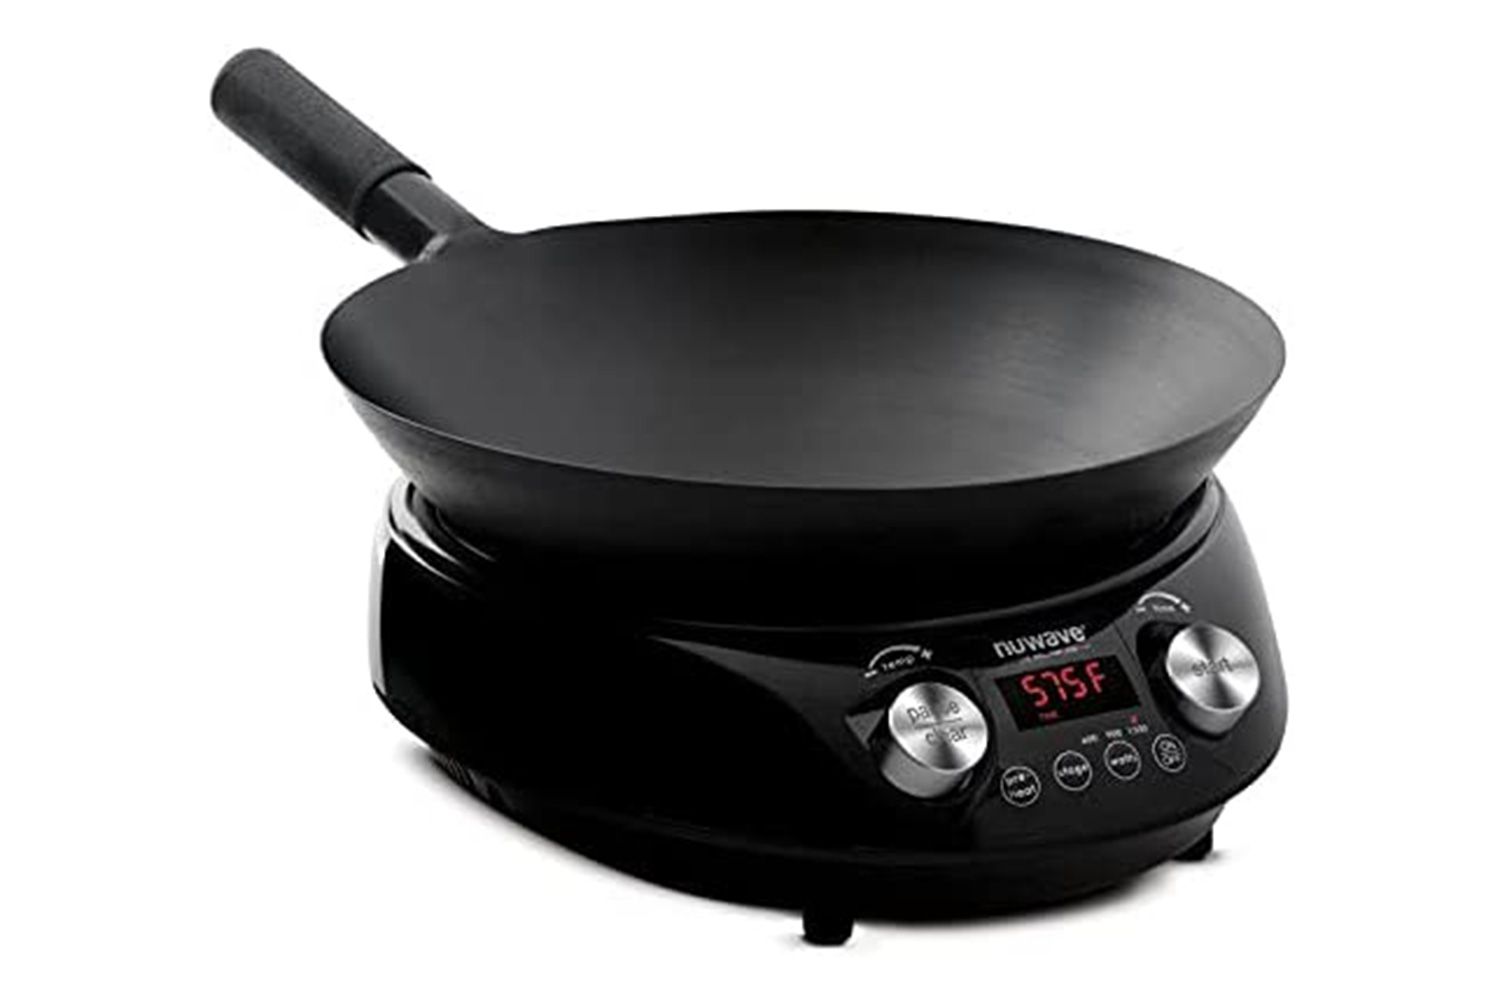 NUWAVE MOSAIC Induction Wok with 14-inch carbon steel